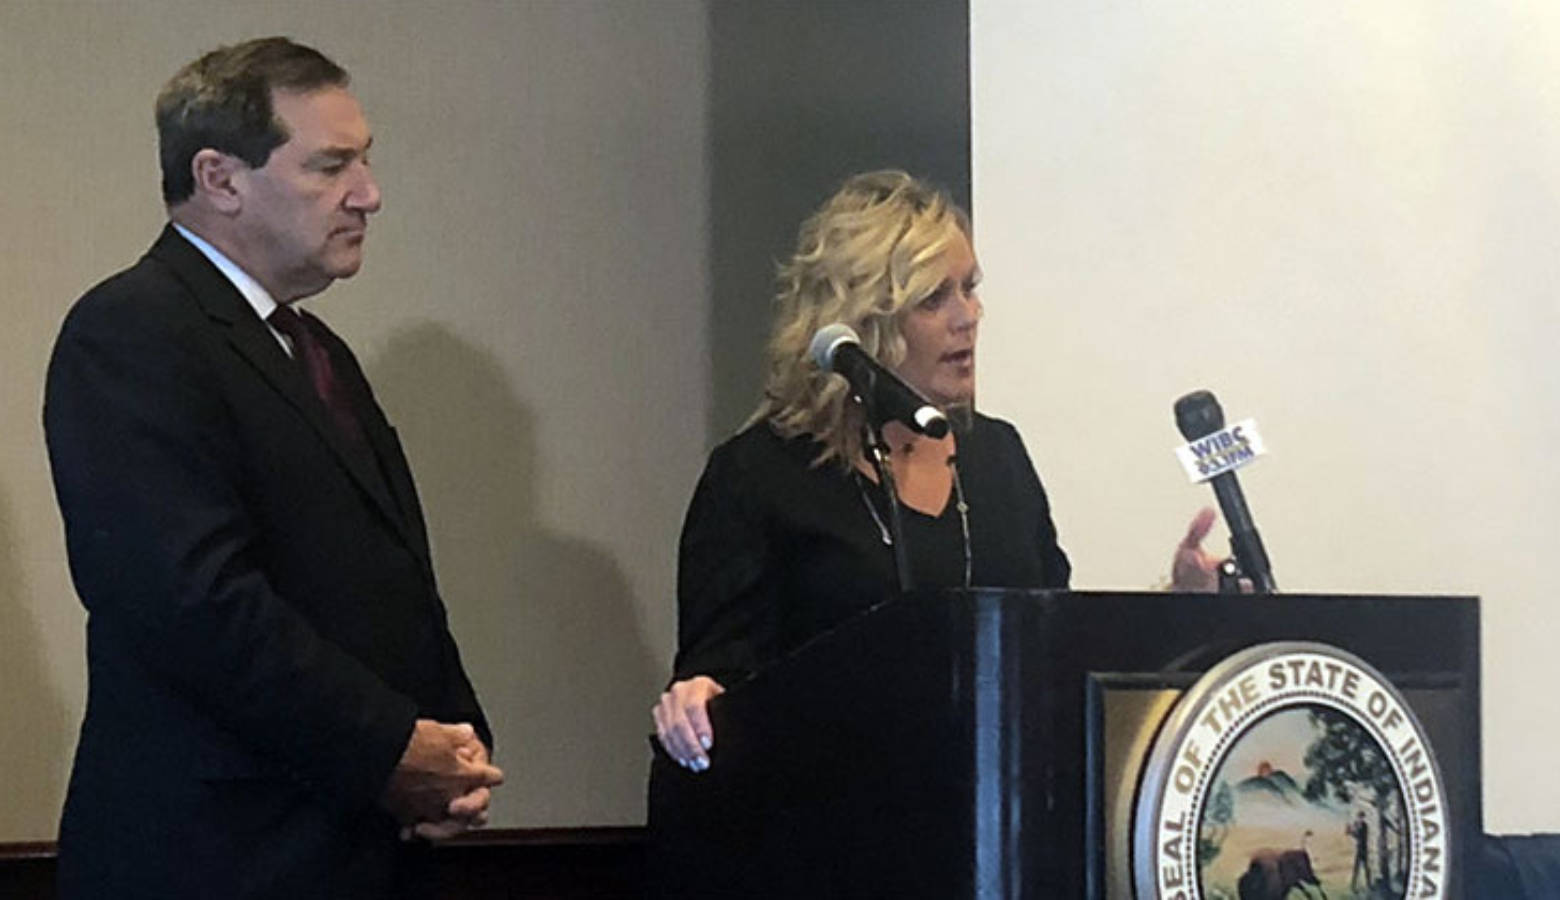 State Superintendent of Public Instruction Jennifer McCormick (R) and U.S. Sen. Joe Donnelly (D-Ind.) talk school safety during a press conference Monday.